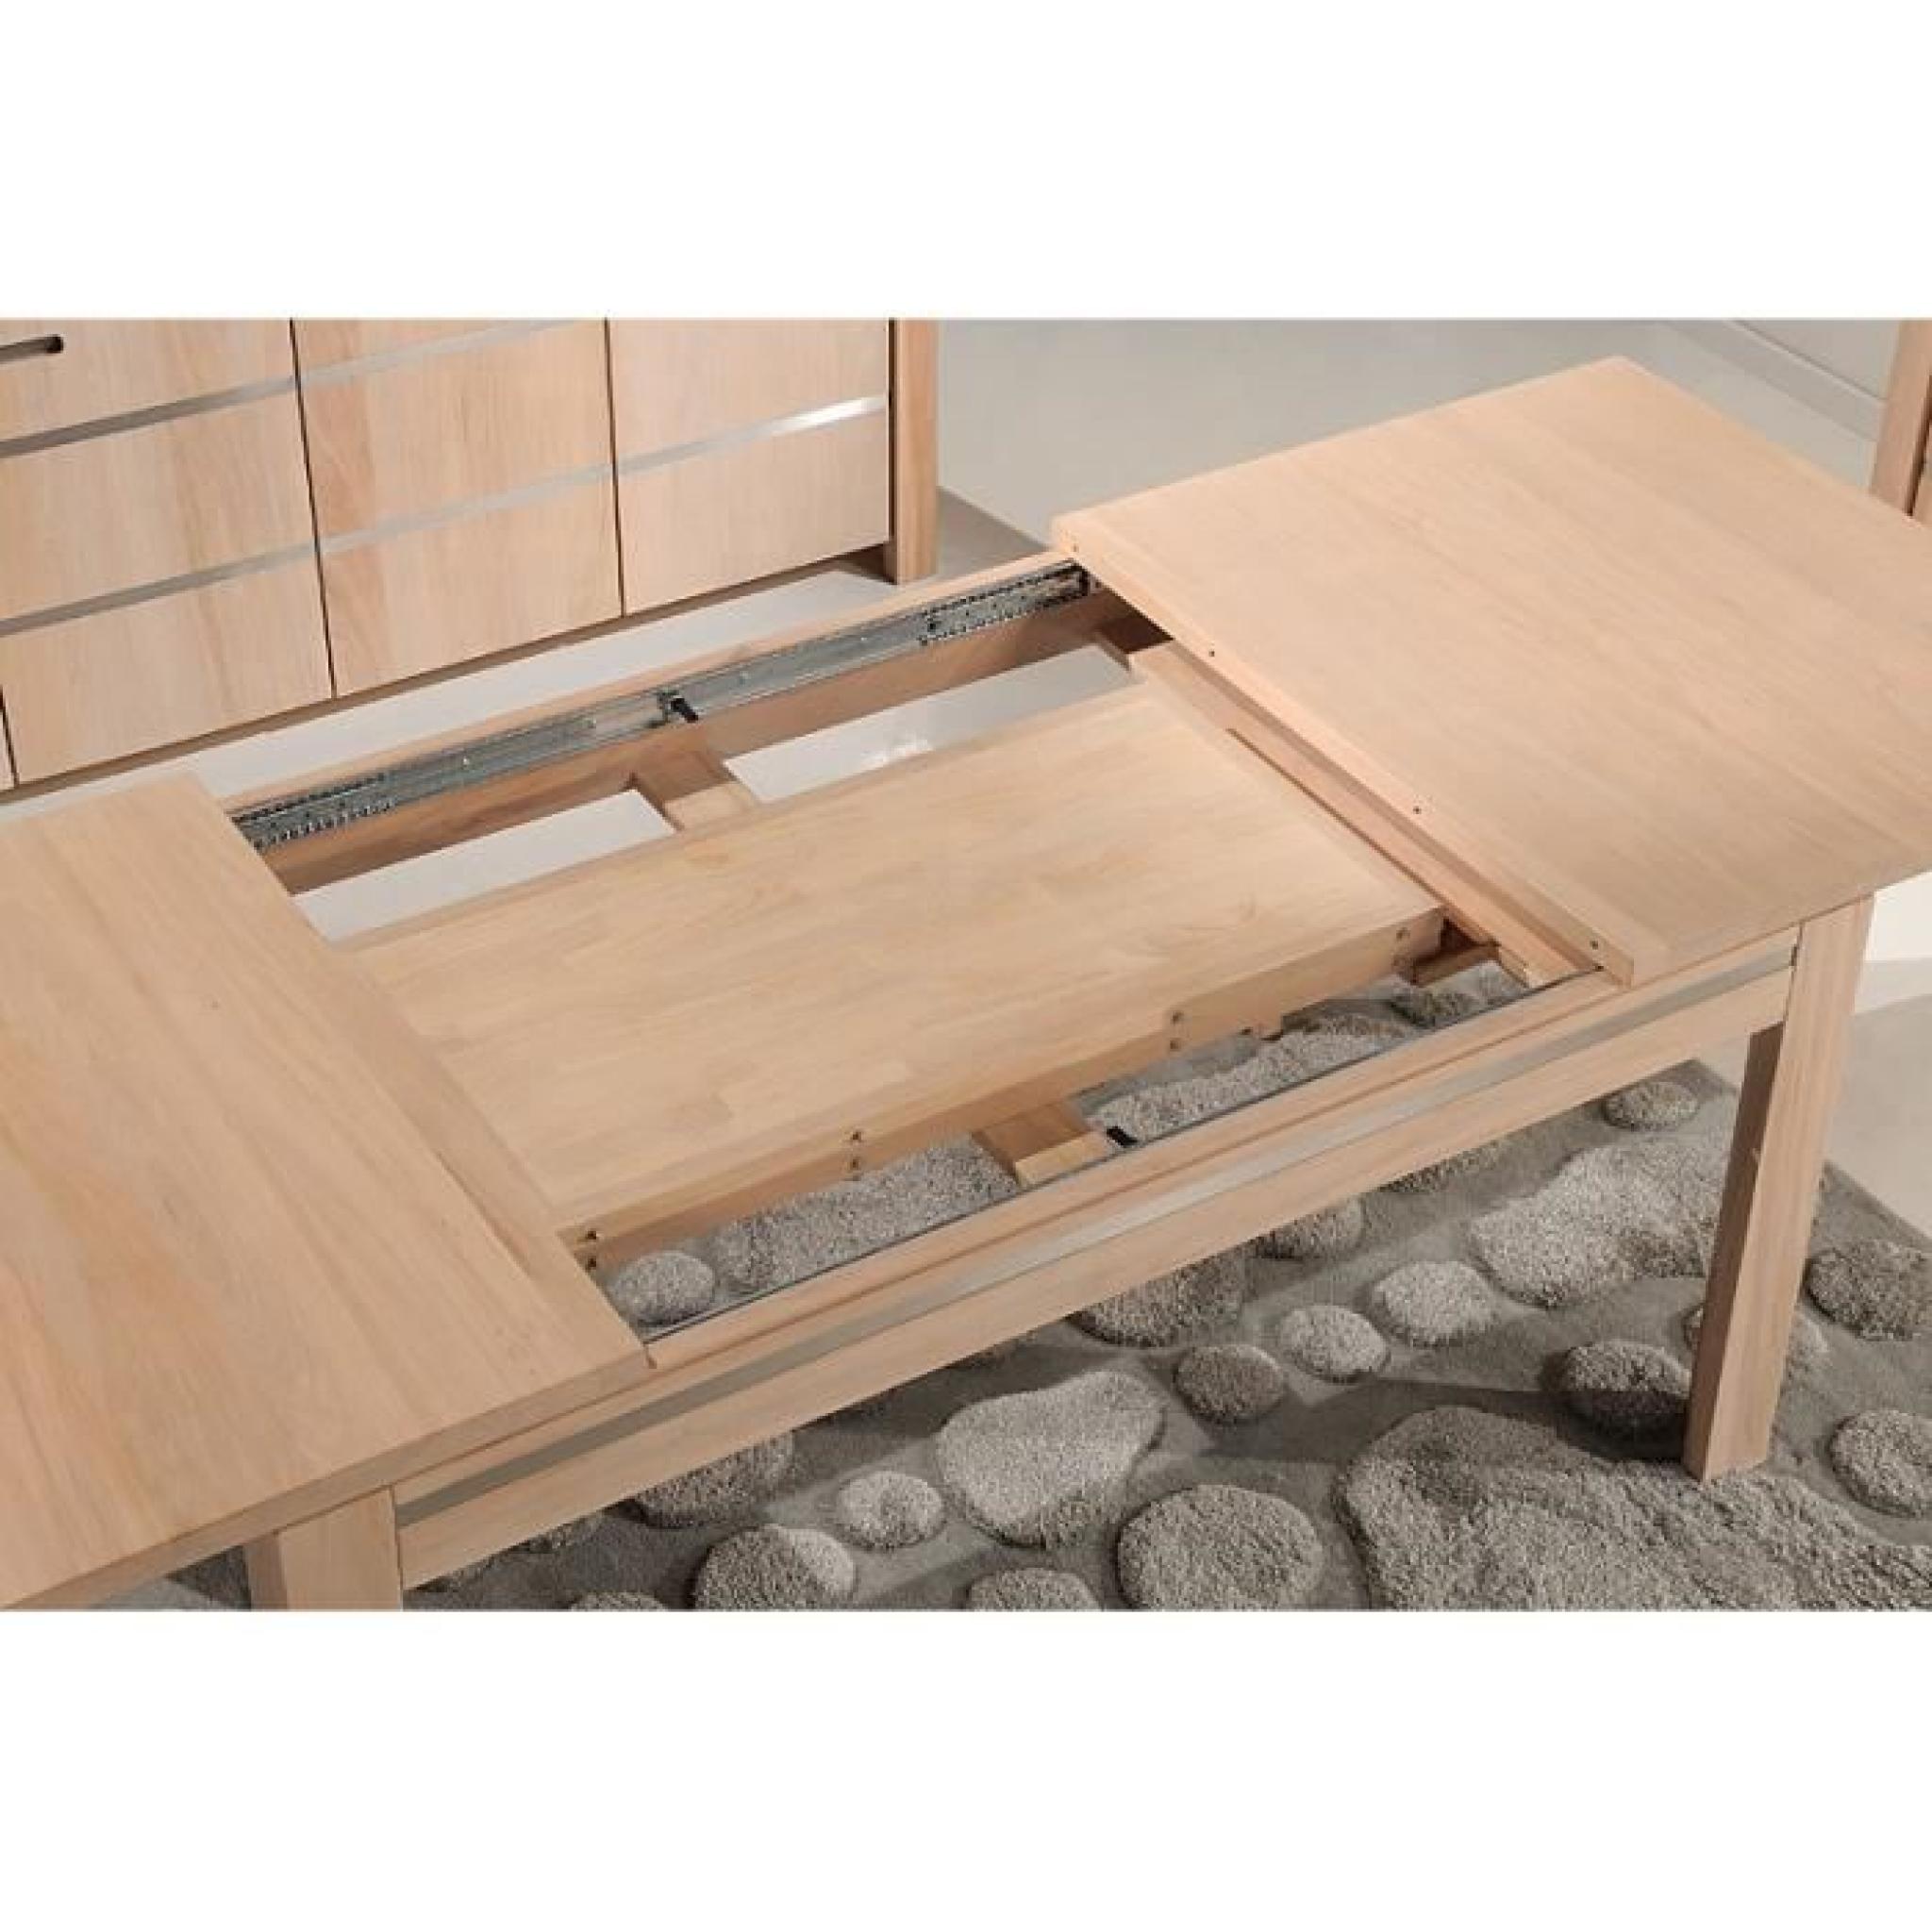 Table OPALE 160/95 ORME MASSIF-INOX (Orme - Naturel) pas cher